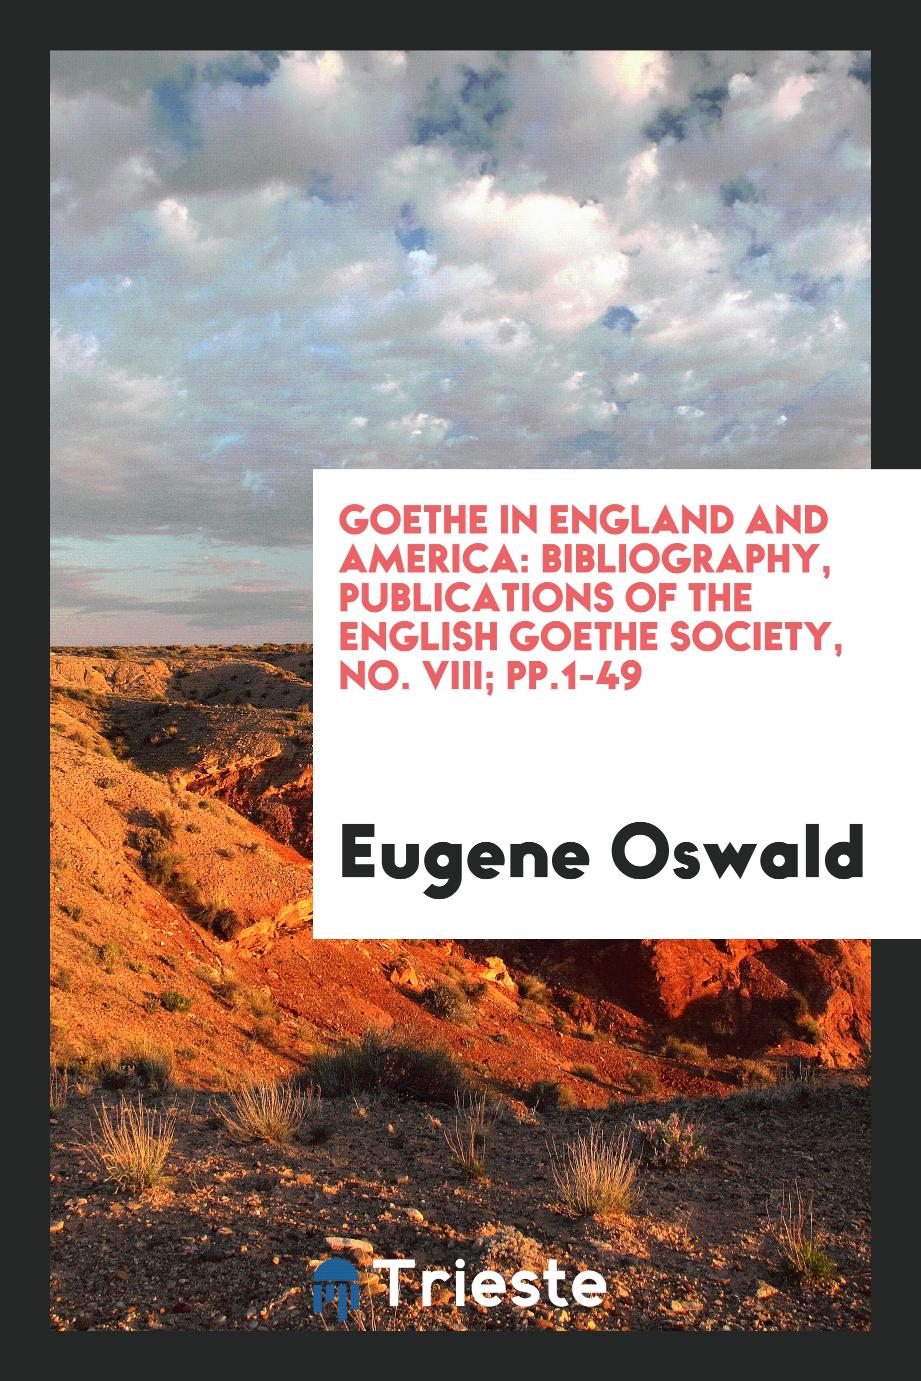 Goethe in England and America: Bibliography, Publications of the English Goethe Society, No. VIII; pp.1-49